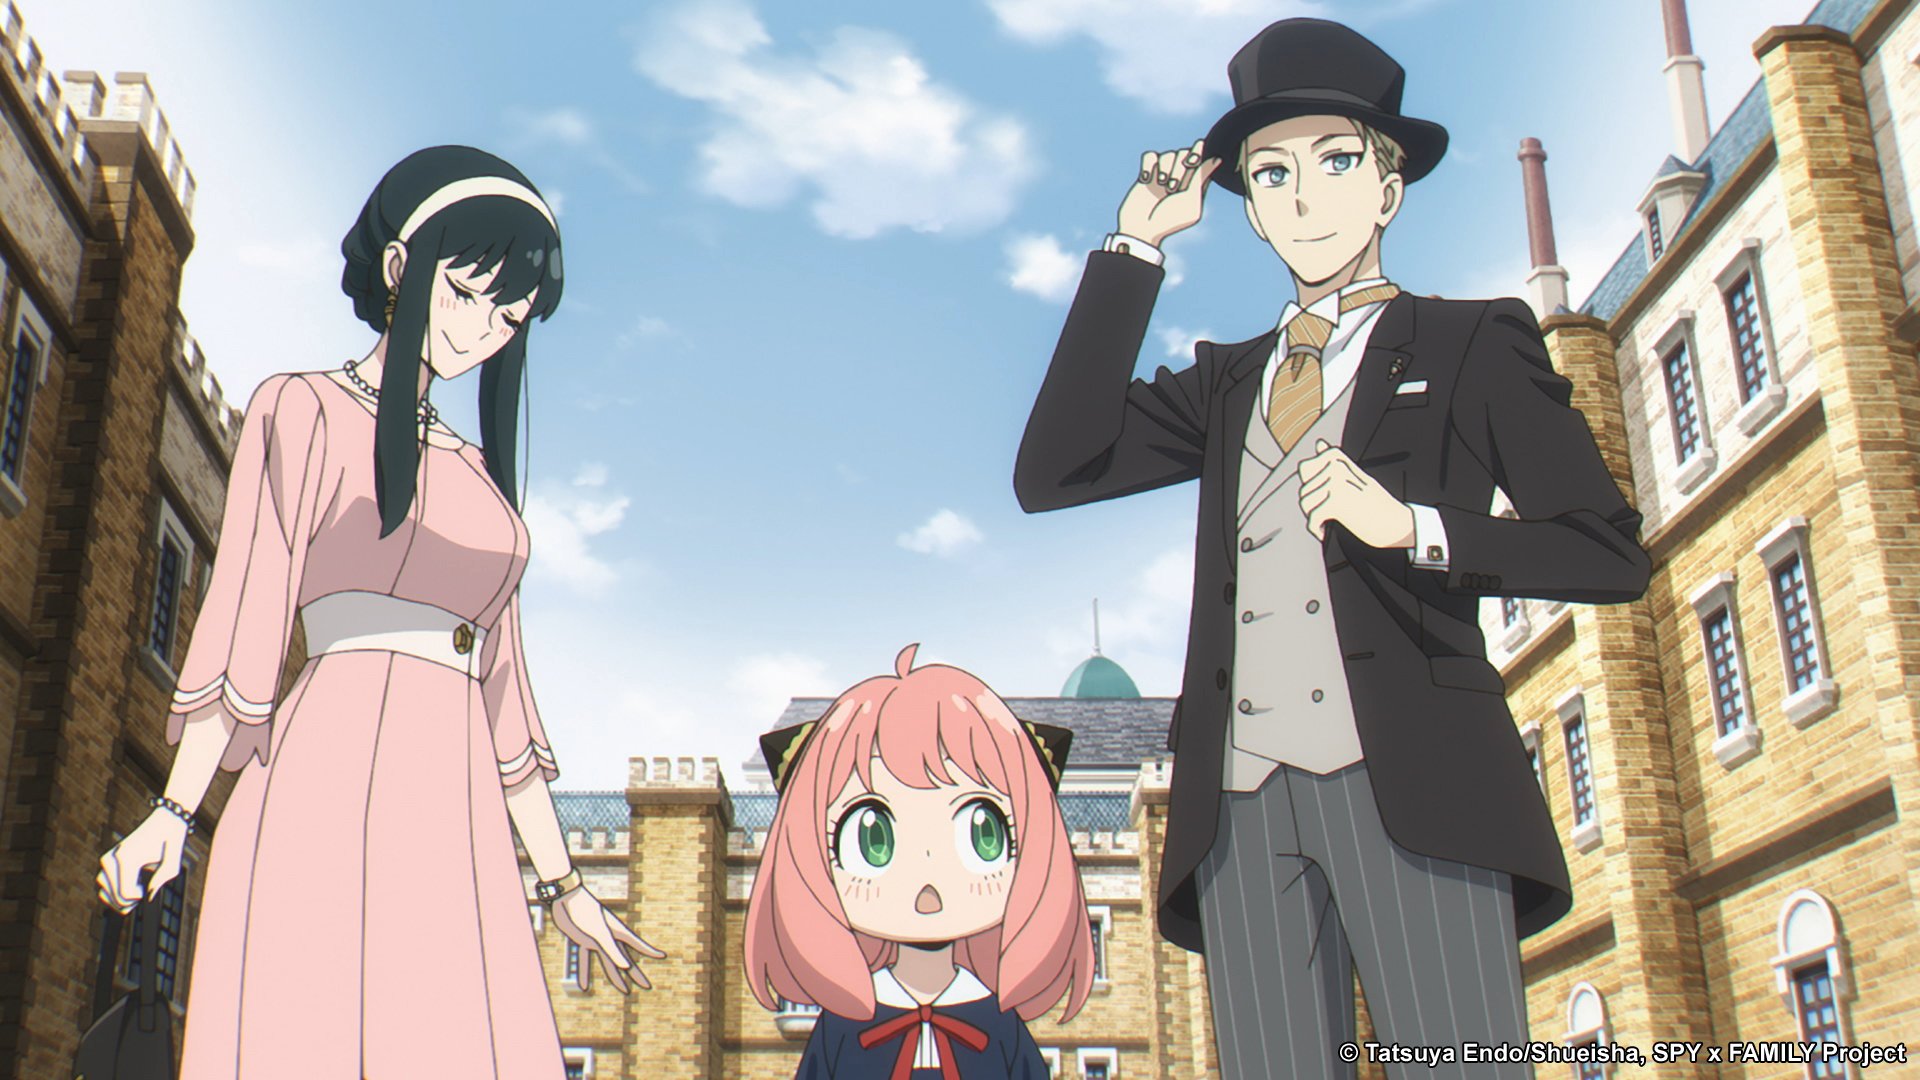 Yor, Anya, and Loid Forger in 'Spy x Family,' which will see Part 2 debut on Netflix in some regions this October. The three are dressed in fancy clothes, and Loid is tipping his hat.